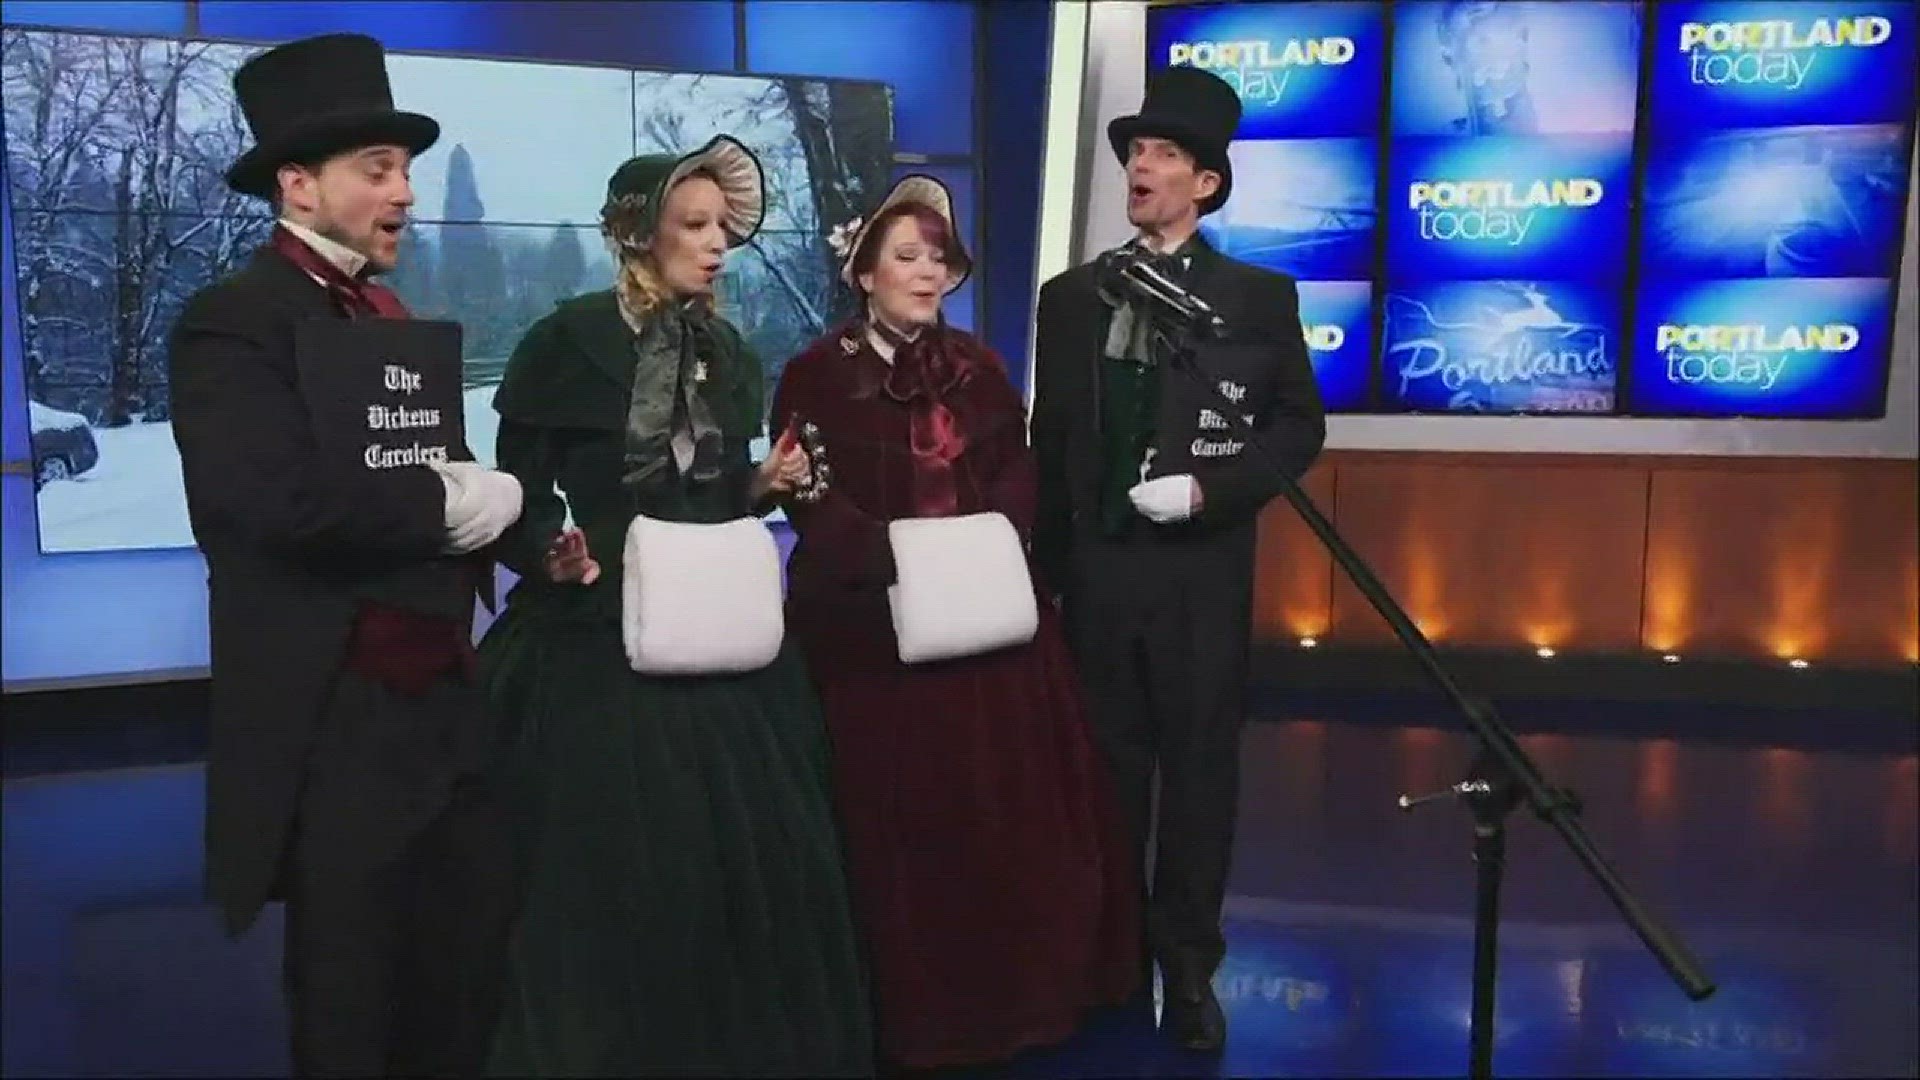 Feel Good Friday: The Dickens Carolers sing again